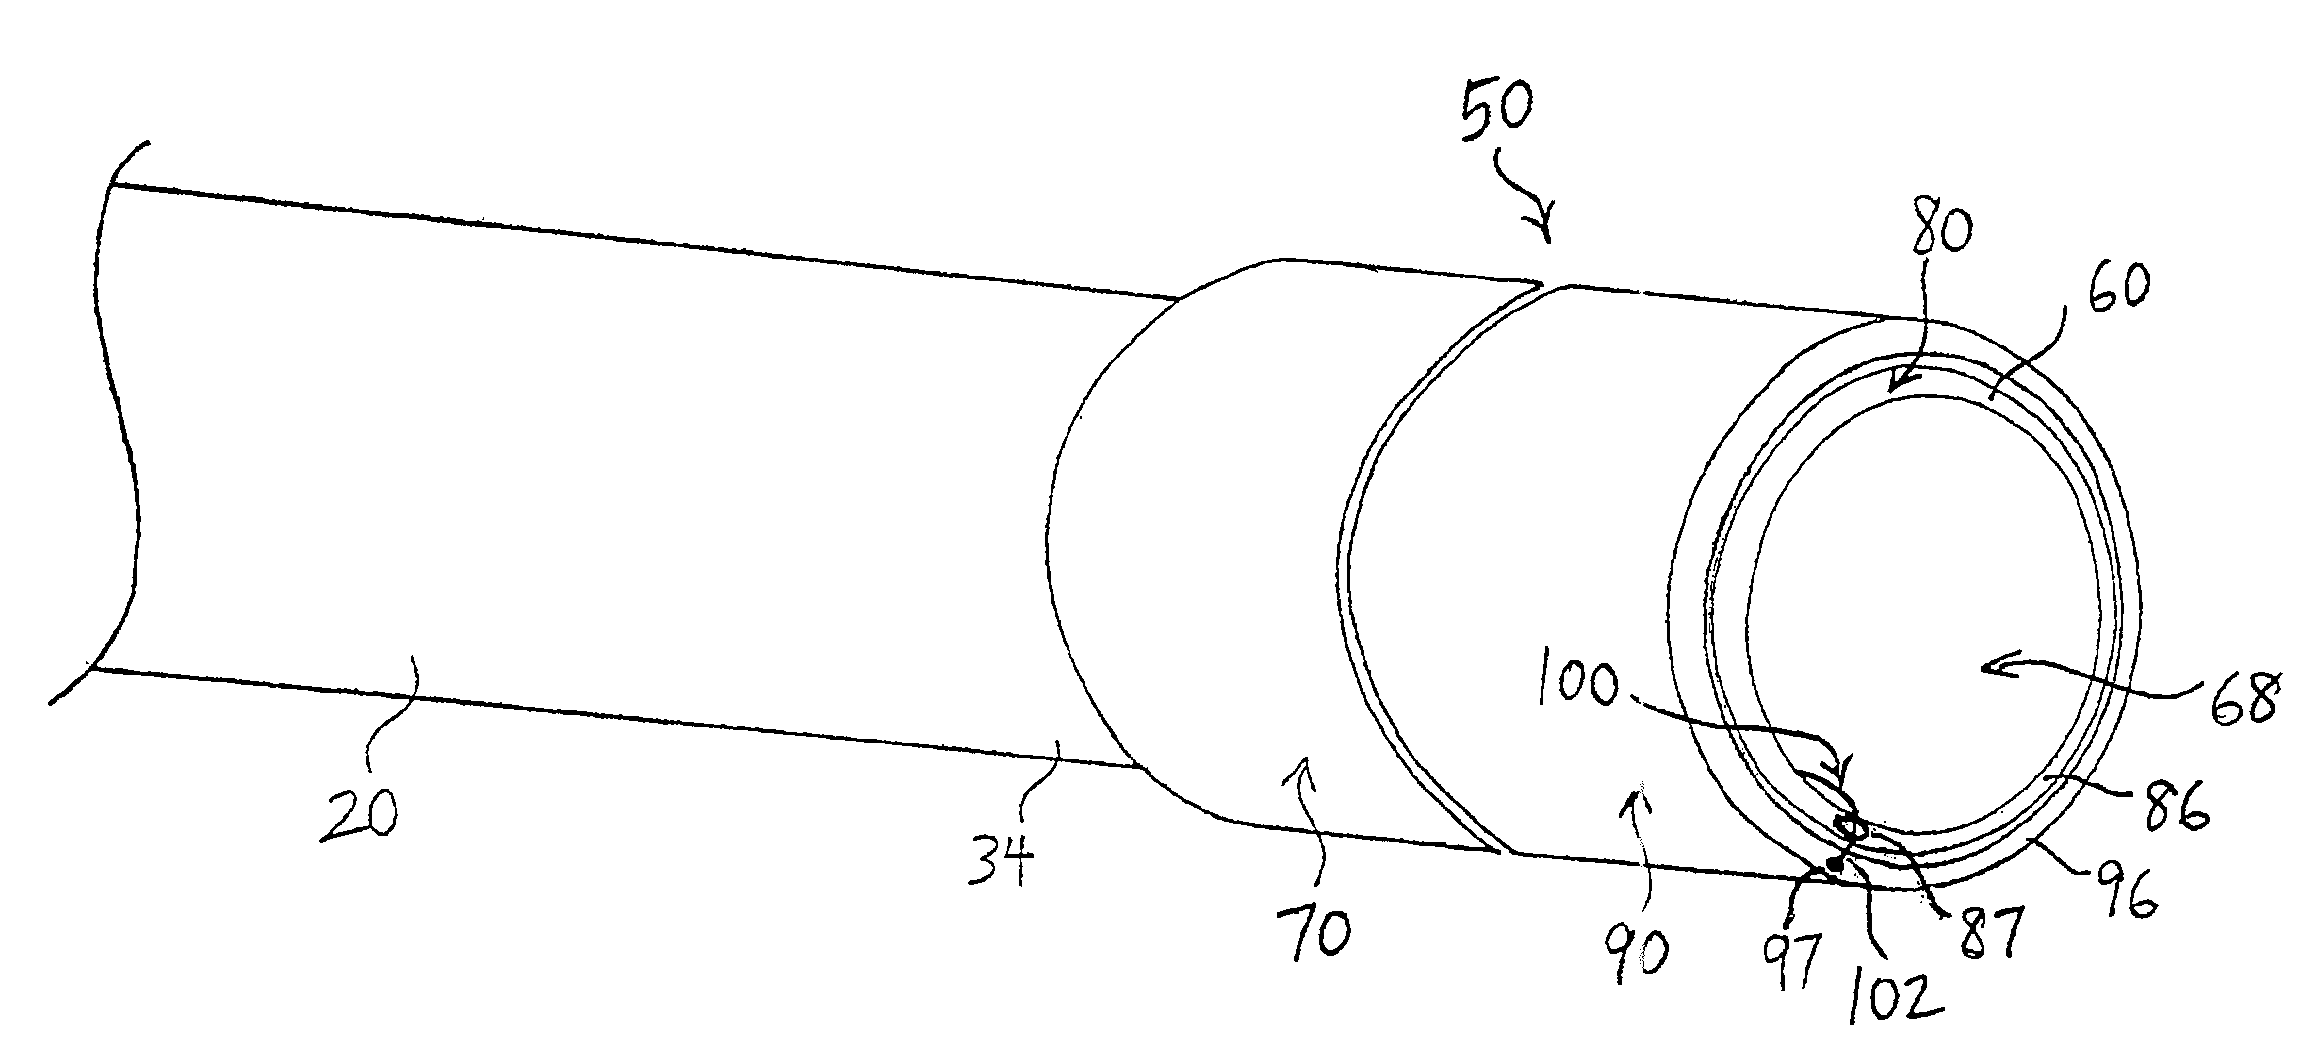 Endoscopic systems and methods for resection of tissue